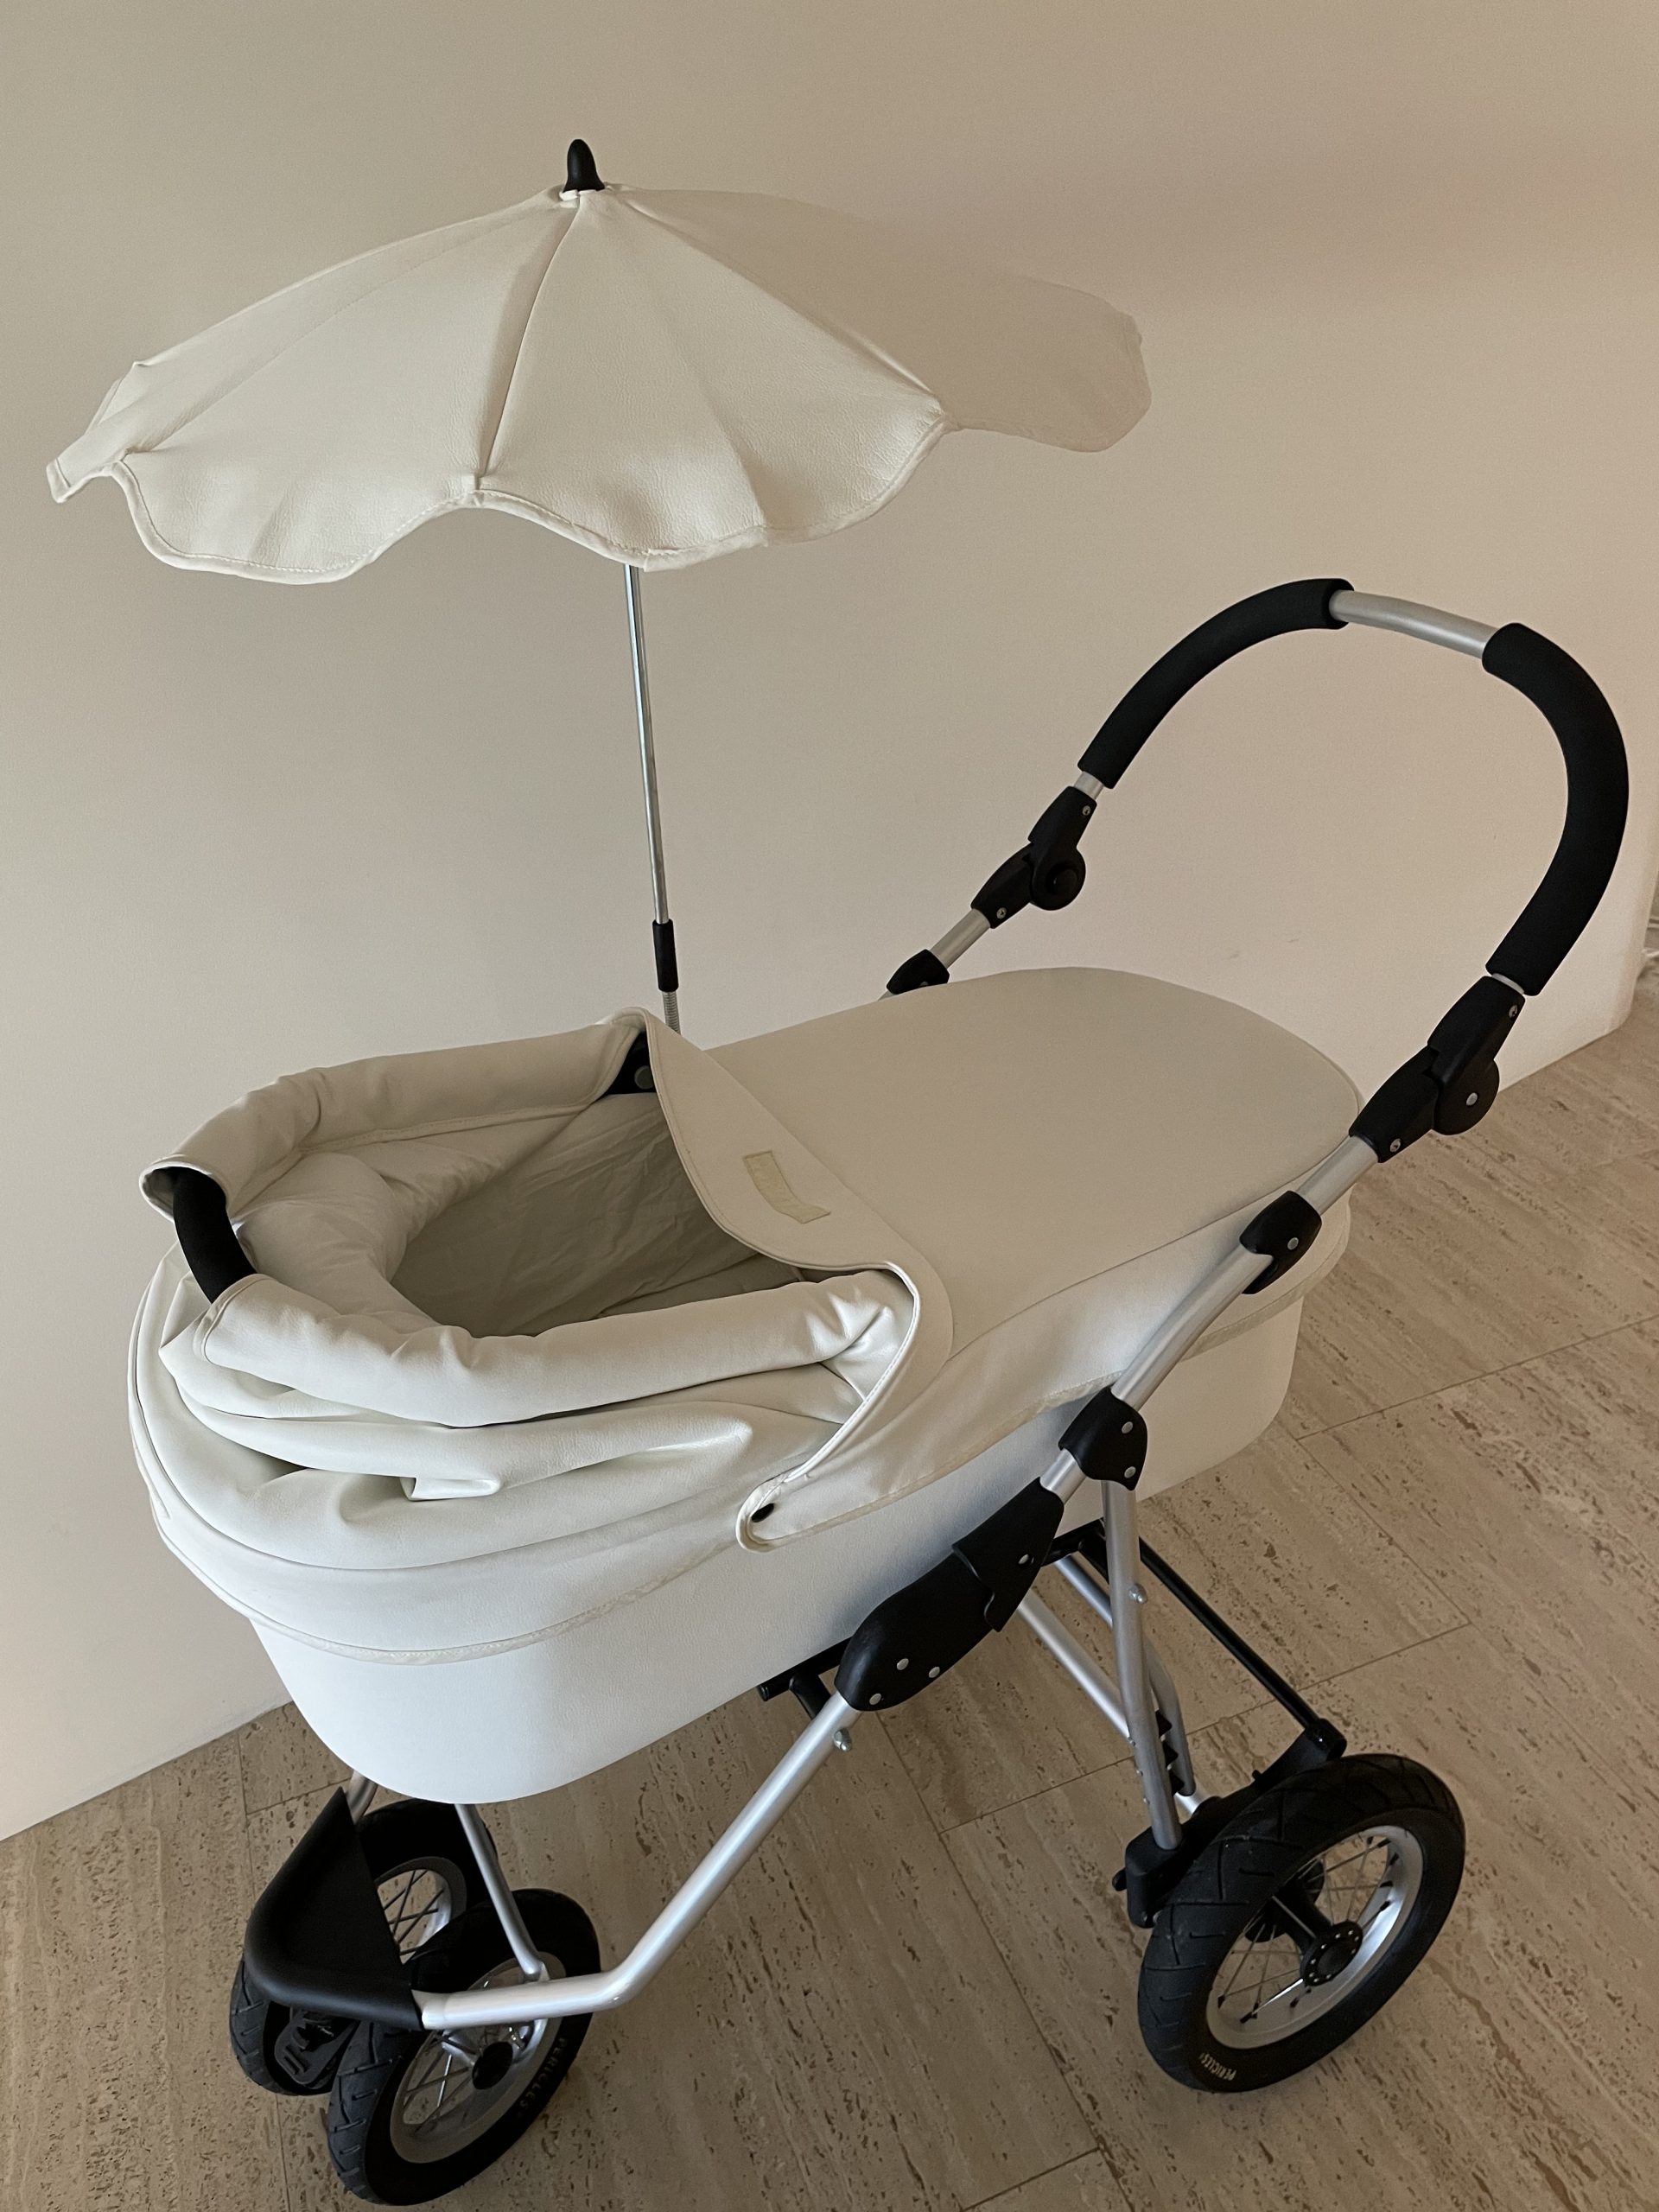 Vintage White Pram and Bassinet with Umbrella – Theodore and Patachou